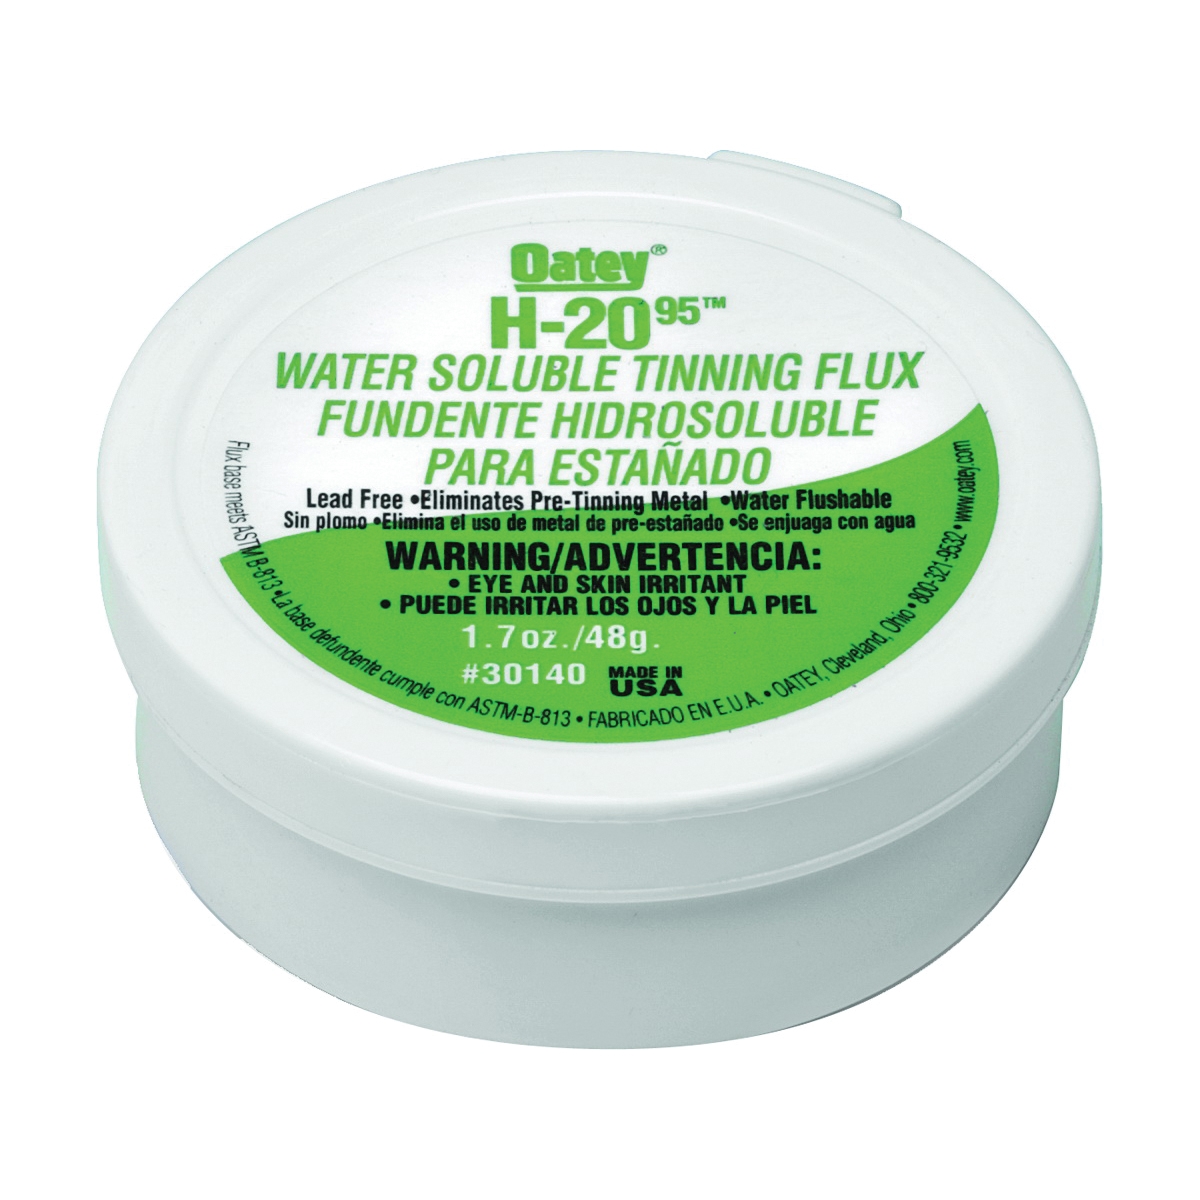 H-20 Series 30140 Water Soluble Flux, 1.7 oz, Paste, Gray